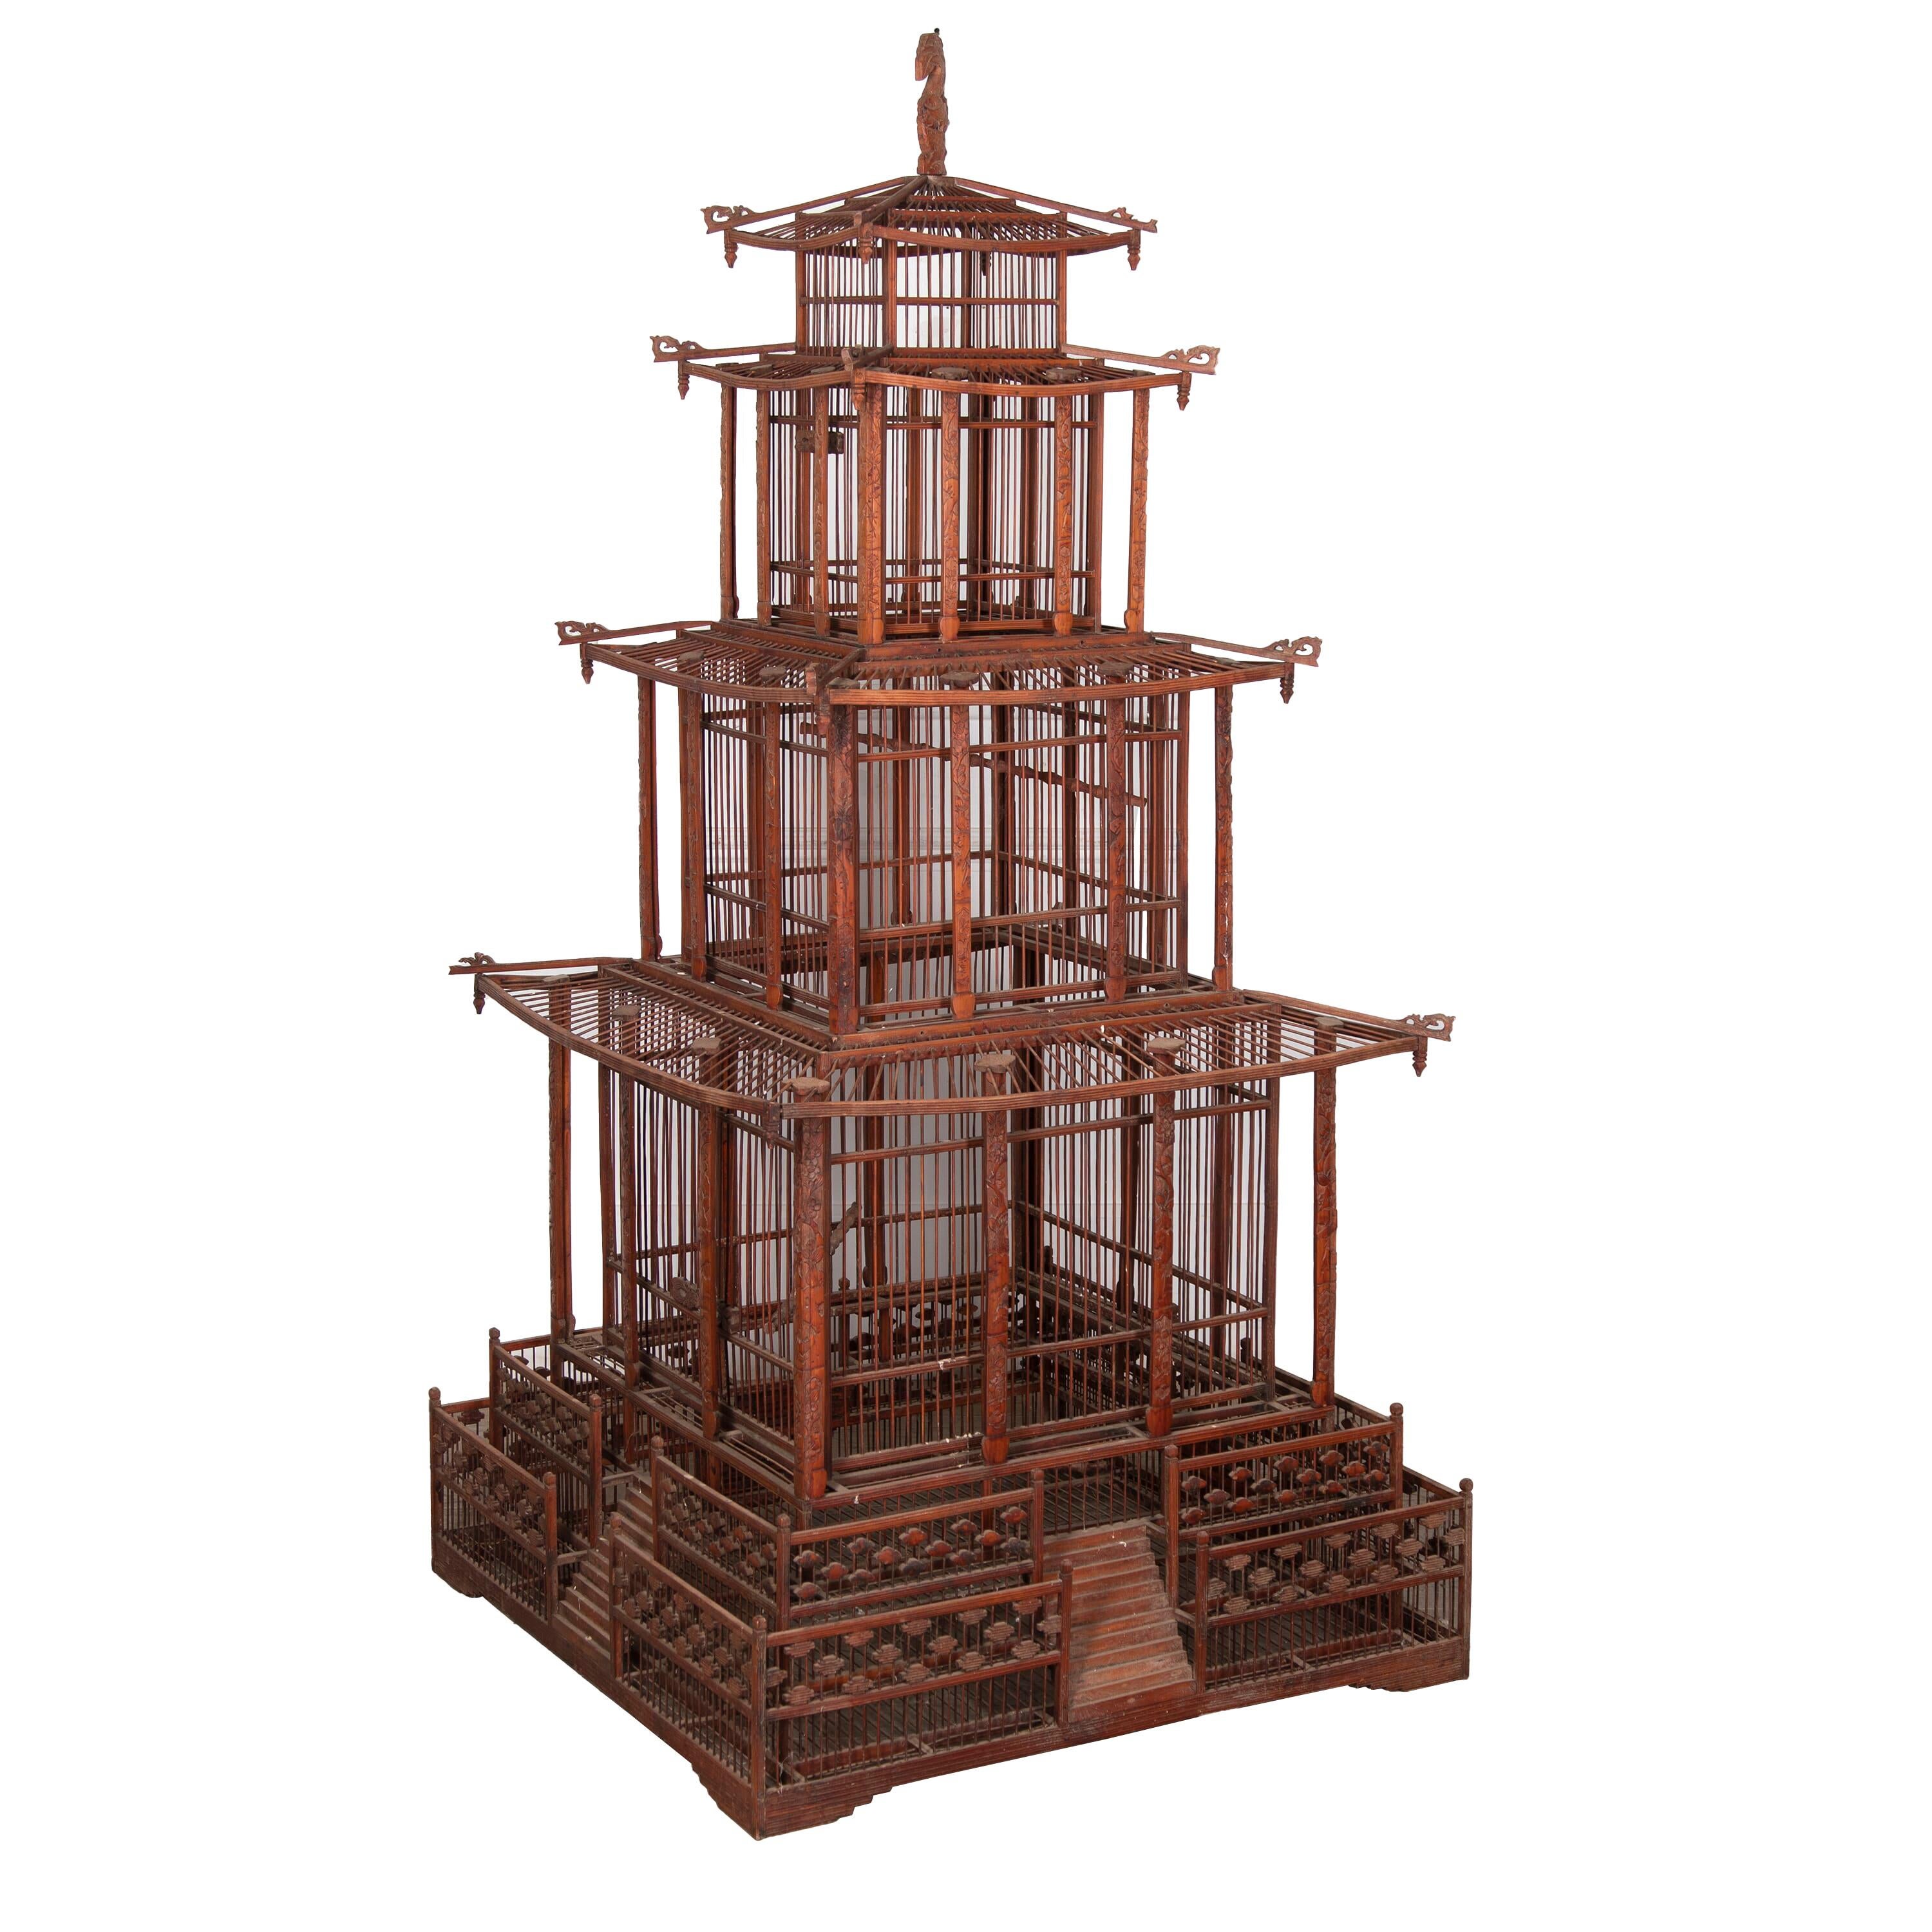 Exceptional 20th Century bird cage in ironwork and wood.
This bird cage was bought back at the beginning of the 20th Century from Indochina by the grandfather of the former owner to house exotic birds.
This example is rare due to its outsized